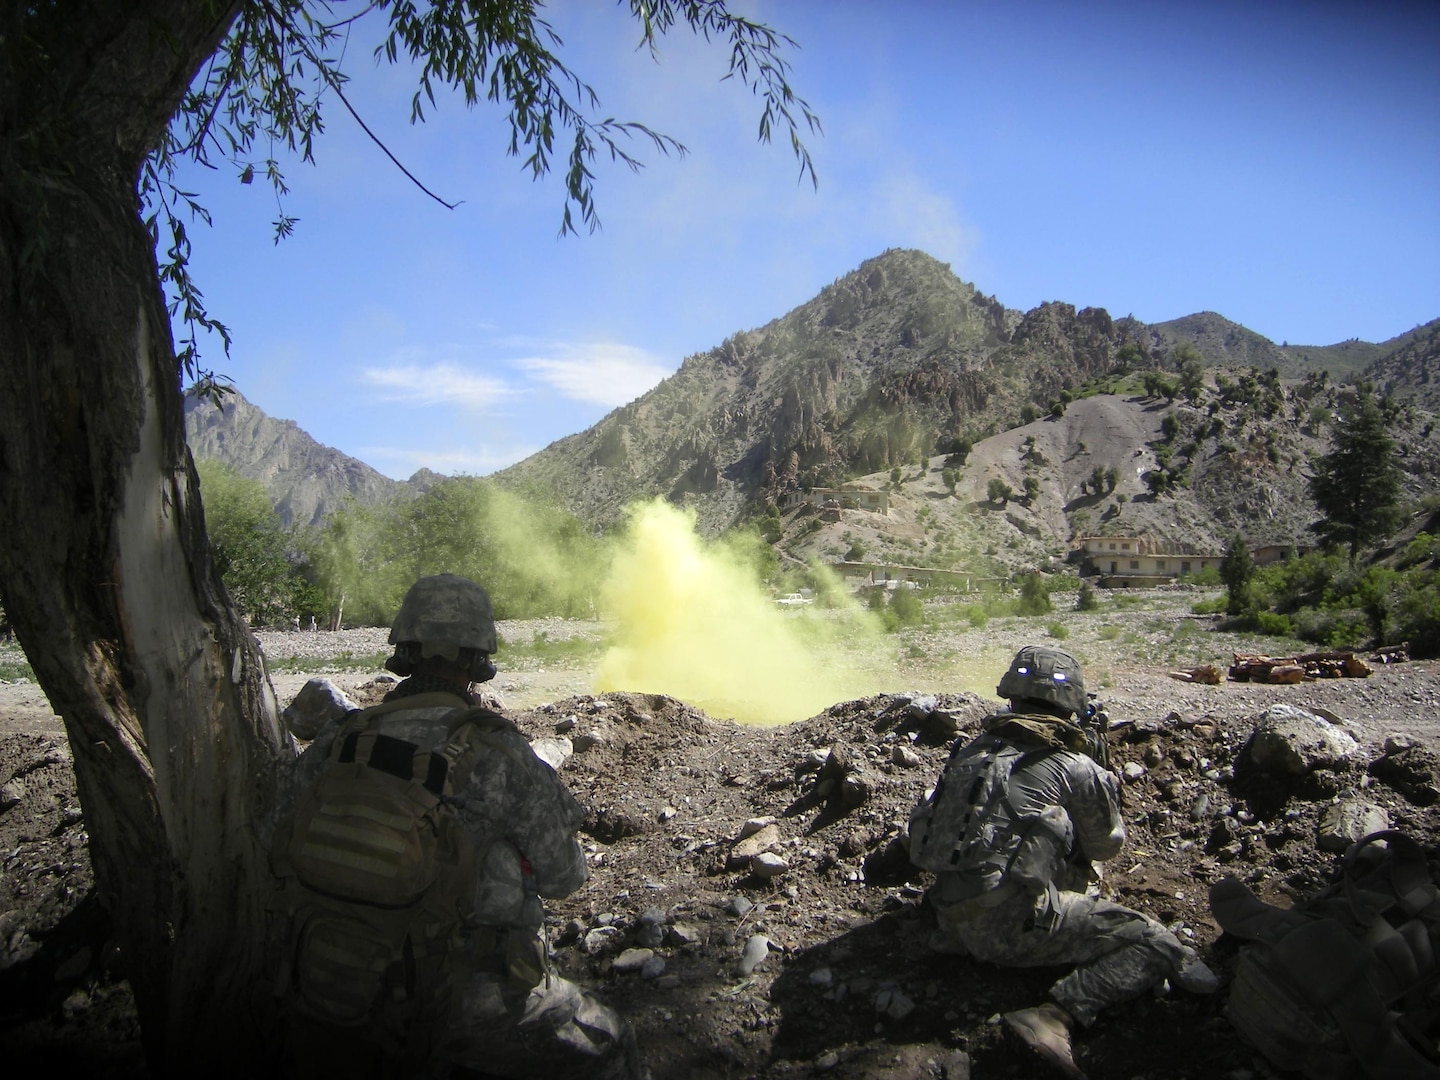 Soldiers with 3rd Battalion, 172nd Infantry Regiment, of the Maine National Guard, prepare to board UH-60 Black Hawk helicopters, after successful completion of their first combat air assault mission in Lalakeh village, Paktya Province, Afghanistan, May 1. During the mission, a weapons cache was found and destroyed, and multiple arms dealers and insurgent militants were captured.